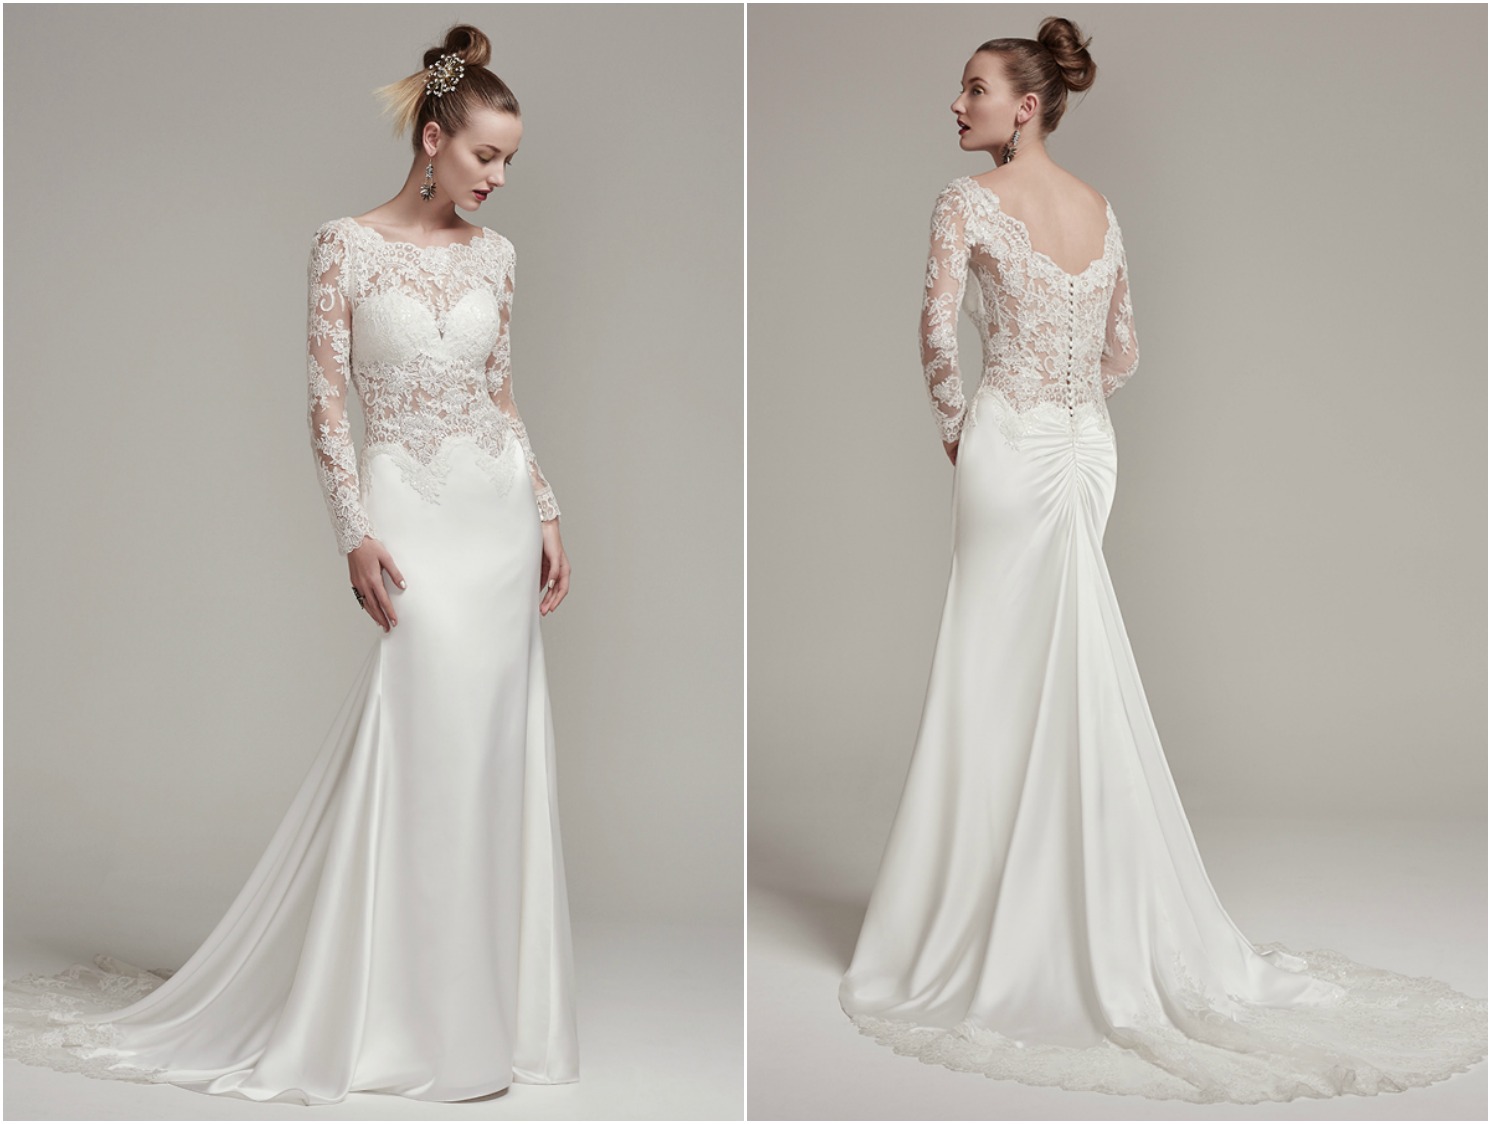 Illusion lace accented with a stunning scalloped lace bateau neckline and long sleeves adds chic sophistication to this Belize satin sheath wedding dress, complete with a detailed illusion lace trimmed train and ruching. Finished with covered buttons over zipper closure. 

<a href="https://www.maggiesottero.com/sottero-and-midgley/fiona-rose/9854" target="_blank">Sottero &amp; Midgley</a>